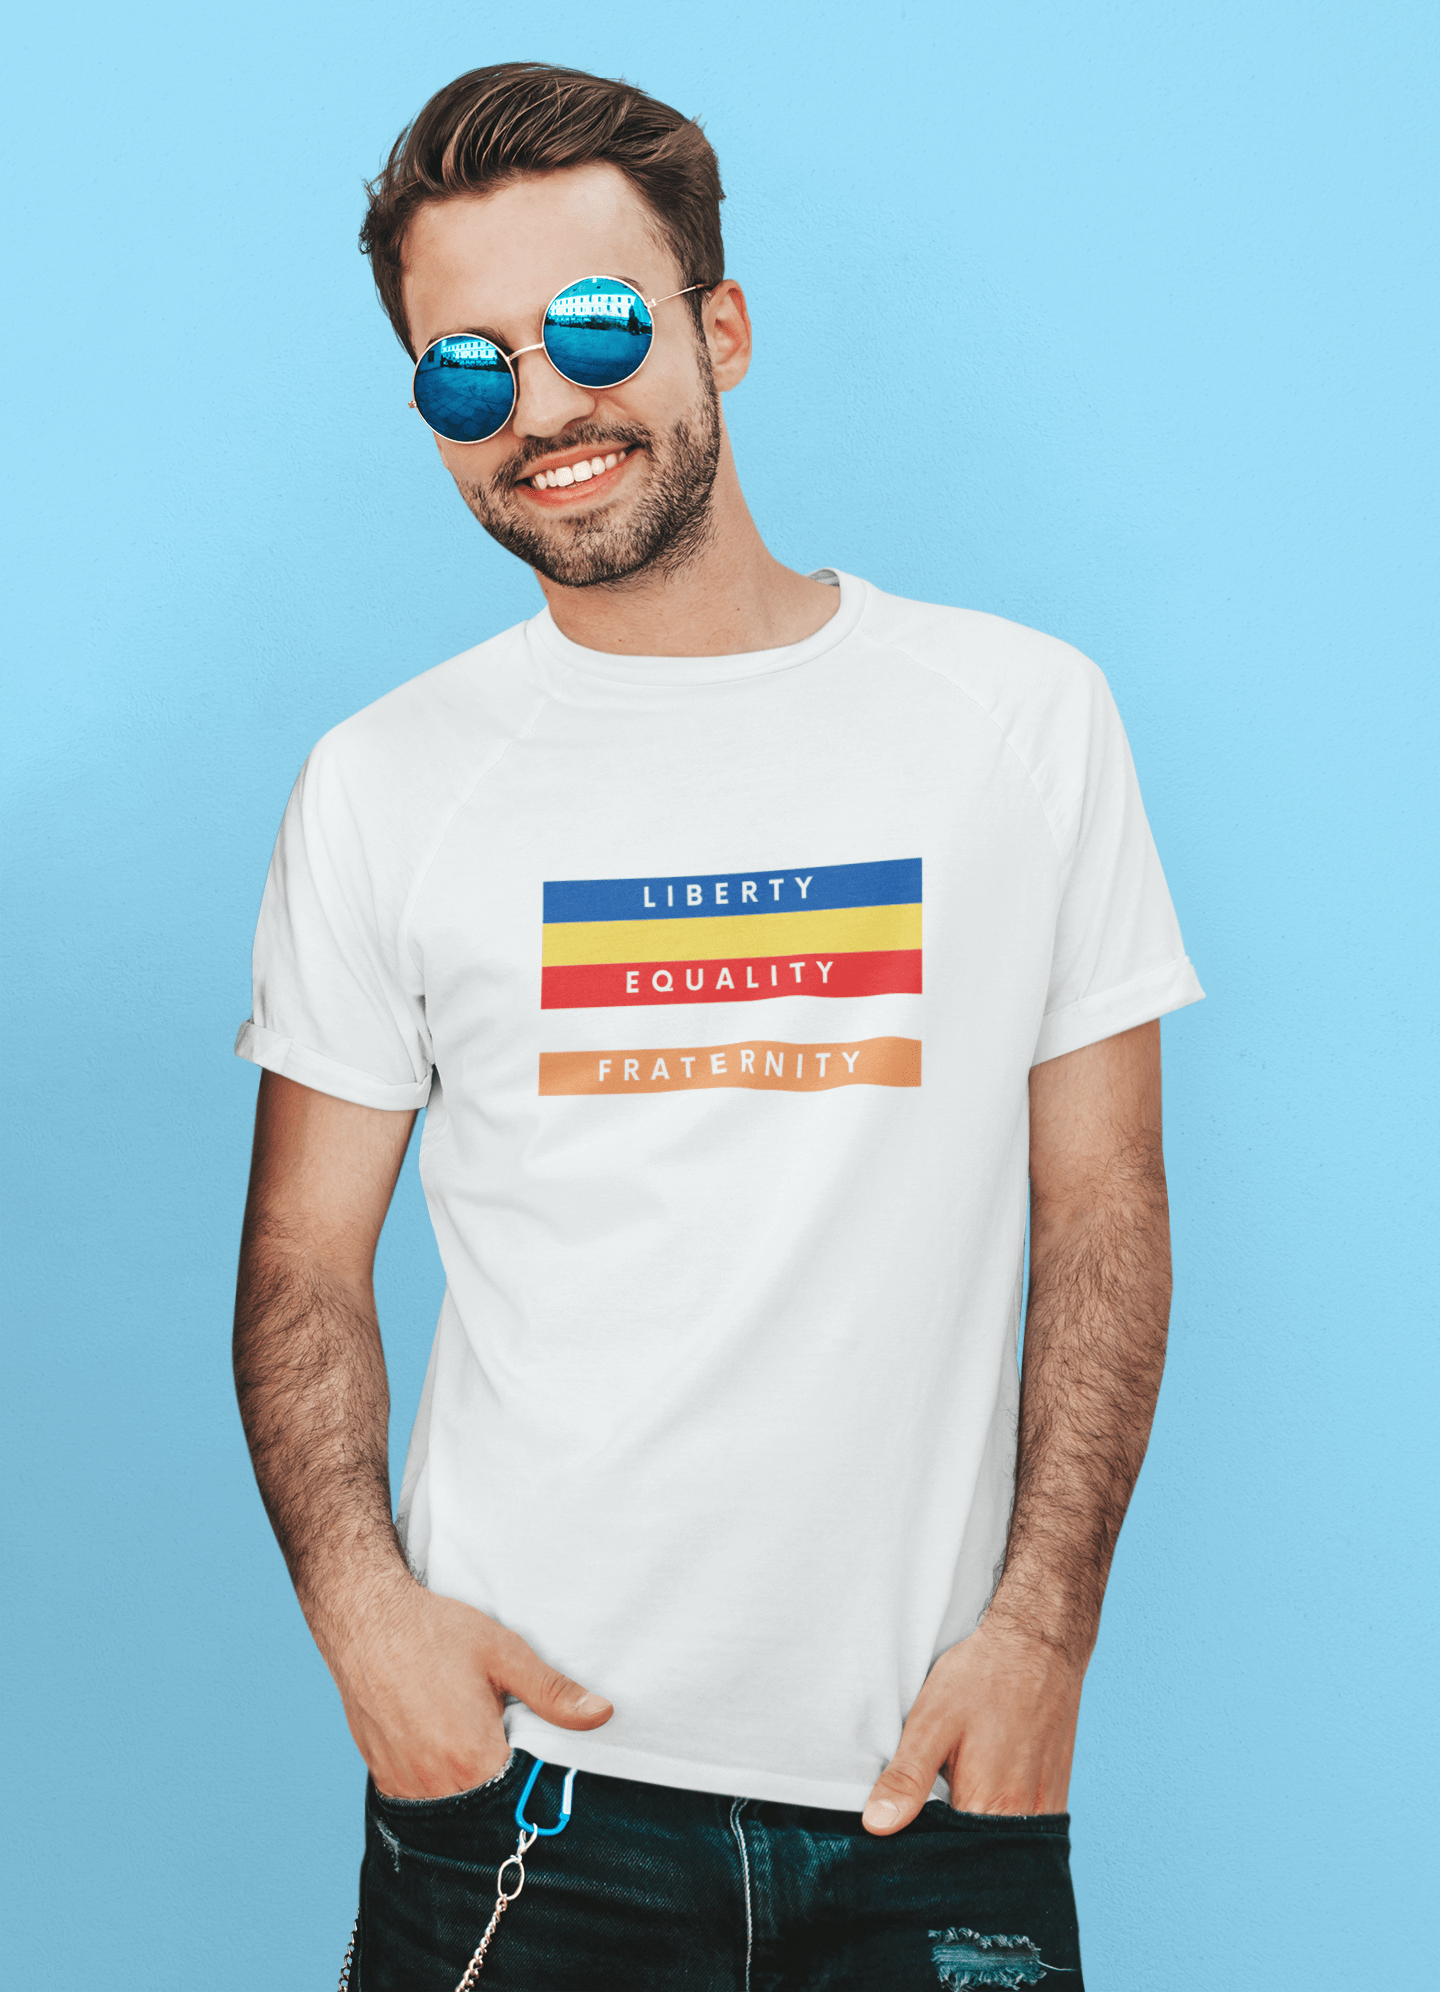 Liberty and Equality Fraternity T-Shirt